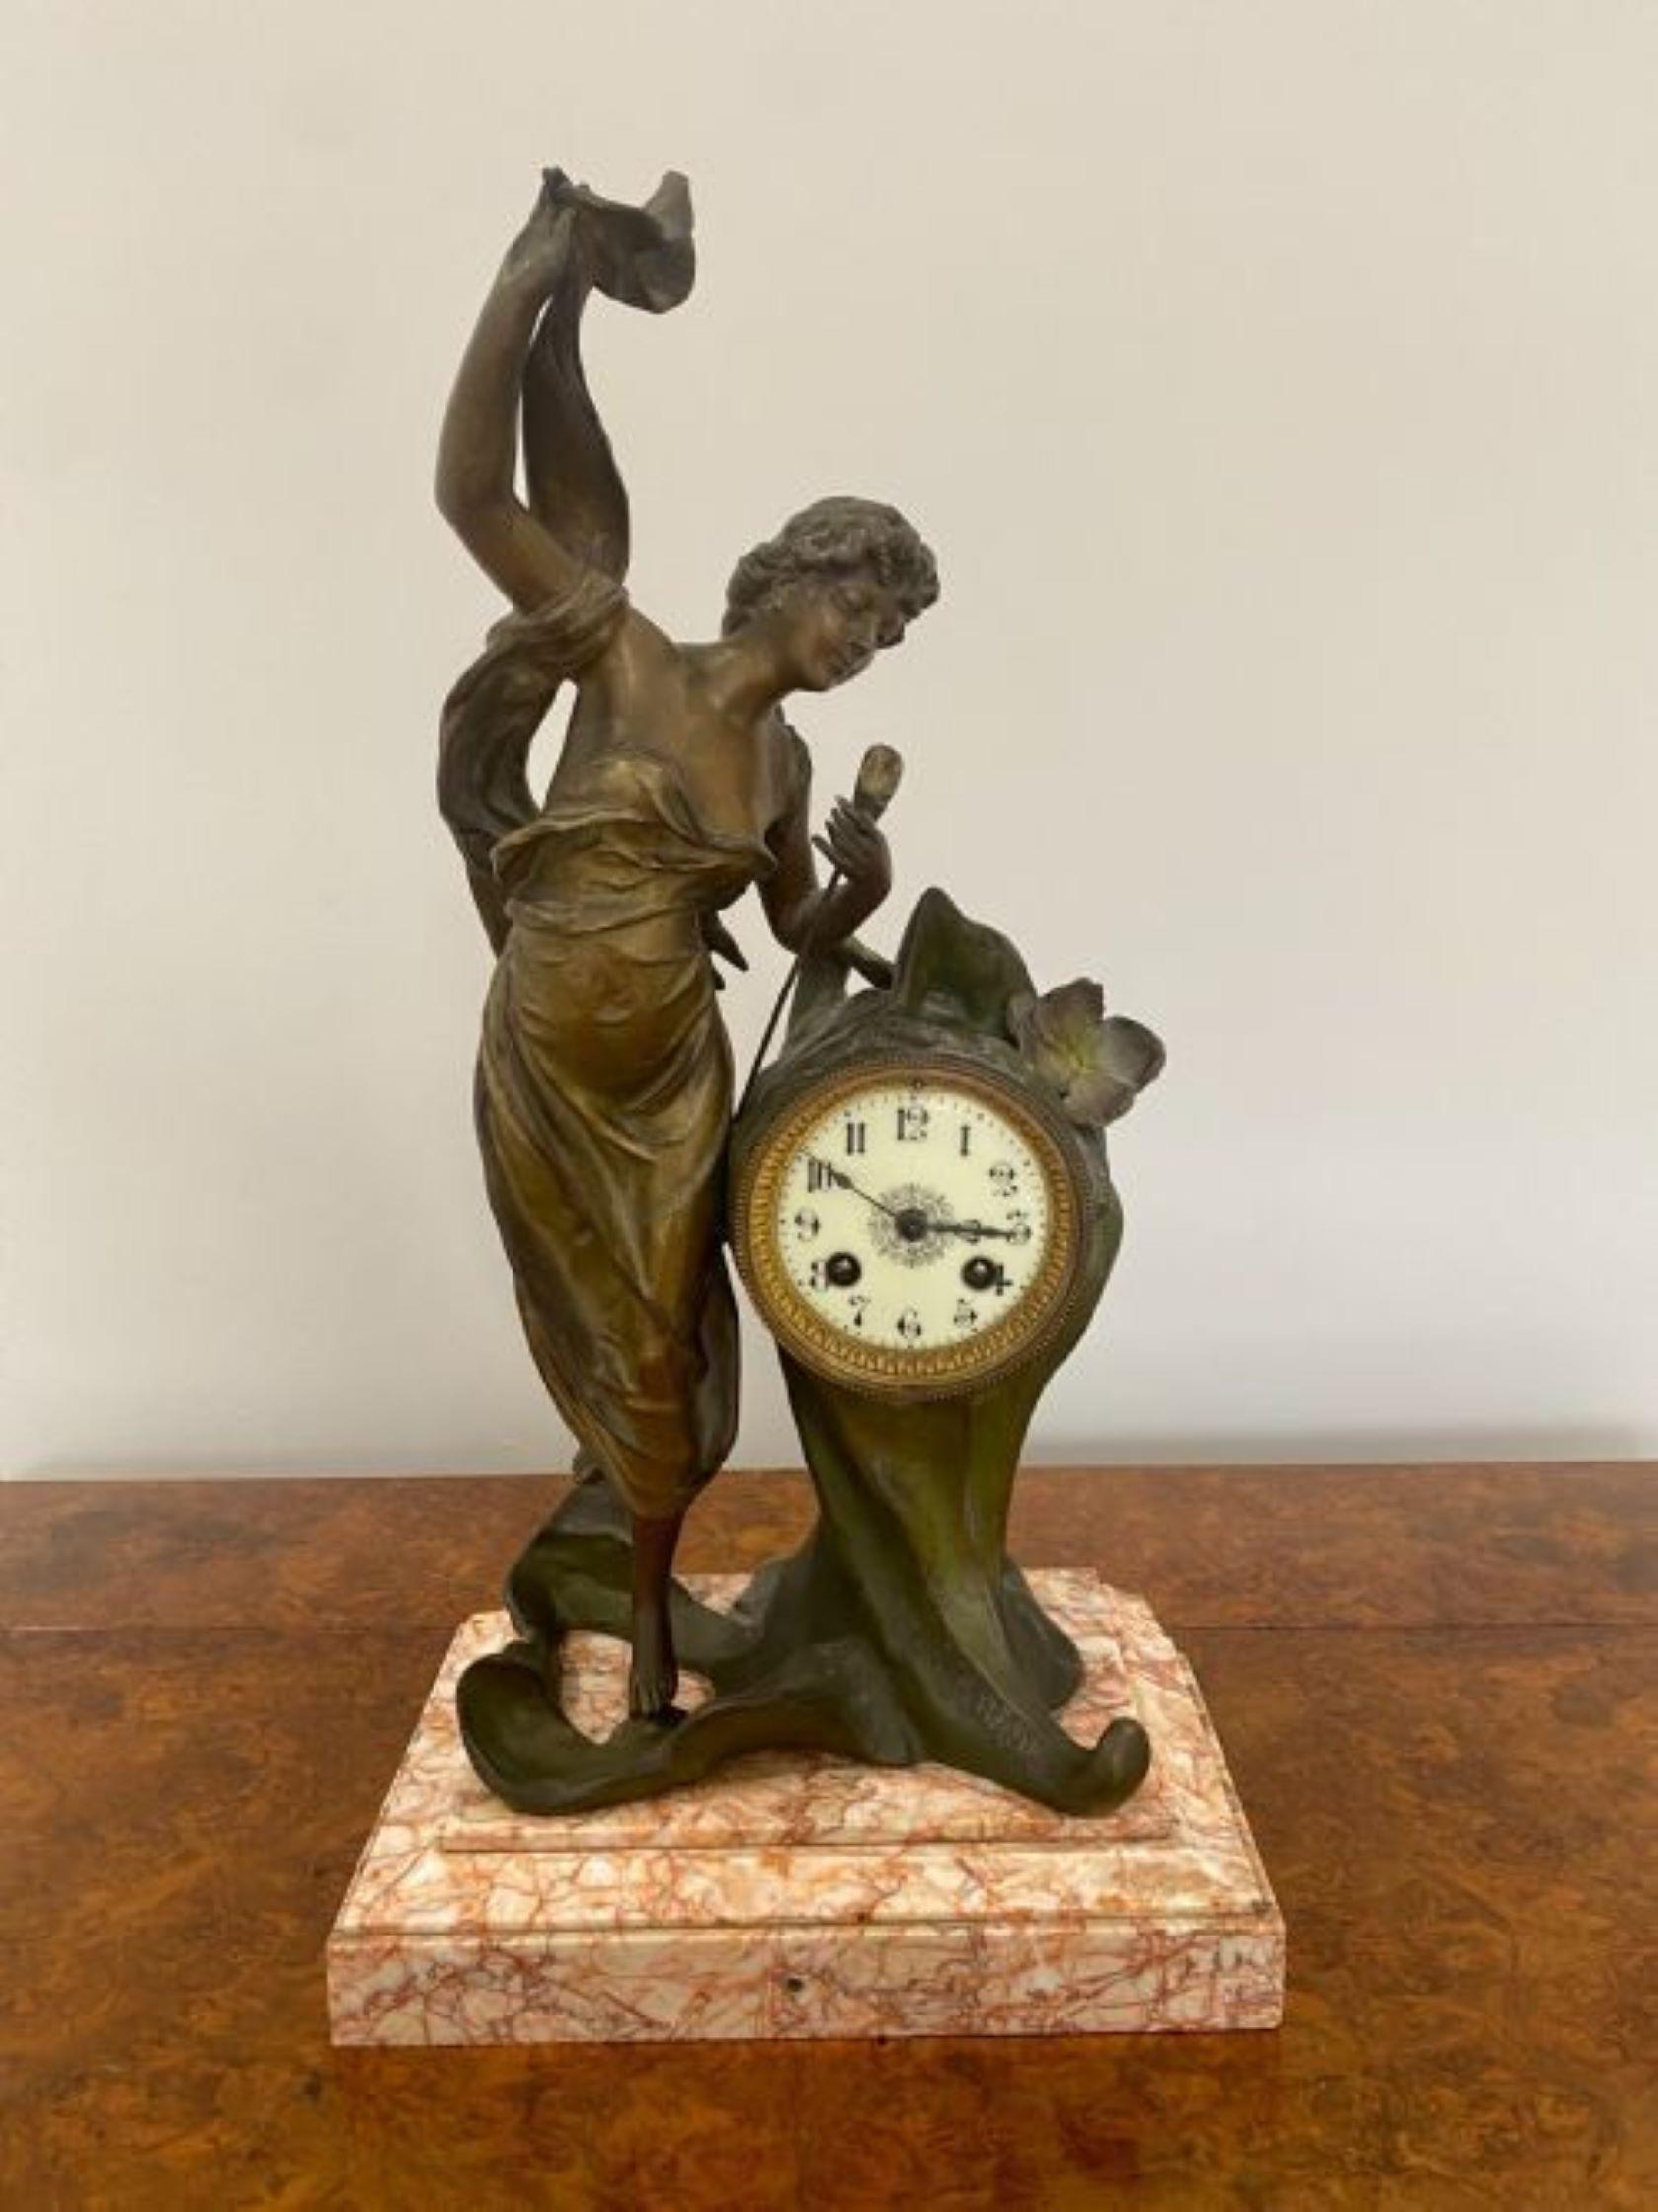 Quality Antique Art Nouveau French L'AURORE mantle clock, having a beautiful lady in bronze holding a flower standing on a marble base, 8 day mantle clock striking on a bell with the original key. L'AURORE signature. Minor chip in the marble base as